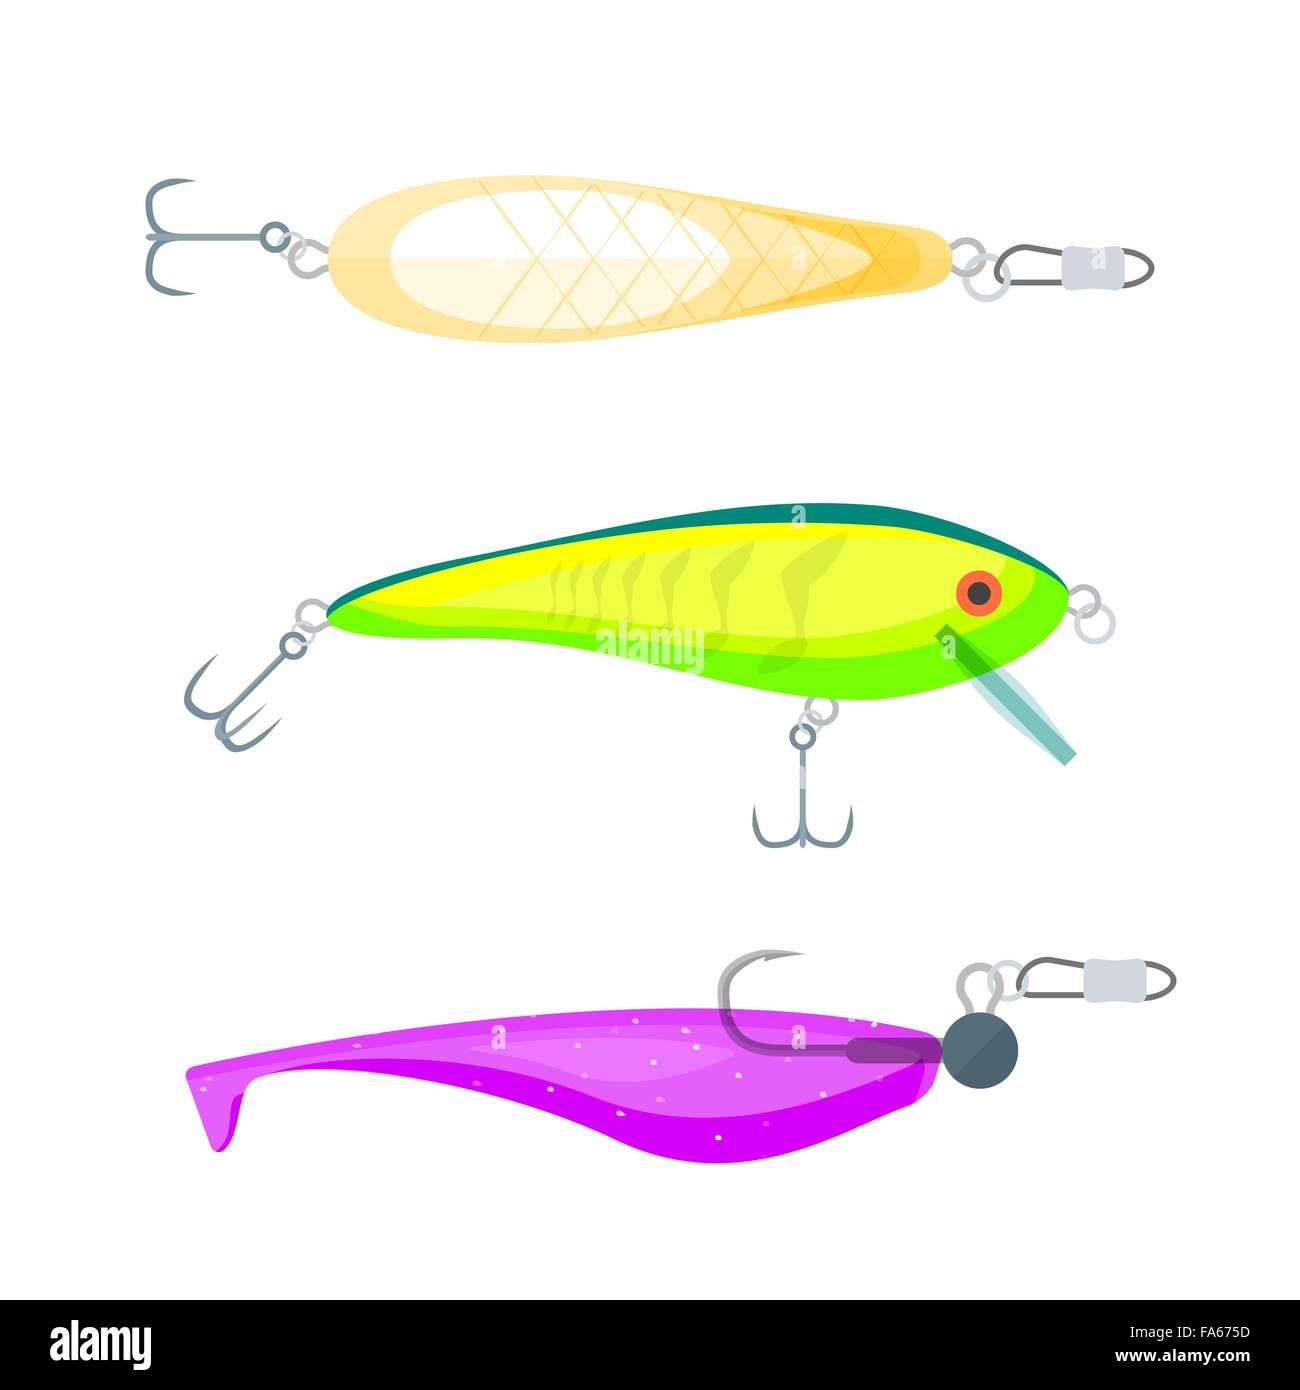 vector colored flat design spoon-bait salad green floating wobbler soft bait purple jighead lure isolated illustration white bac Stock Vector